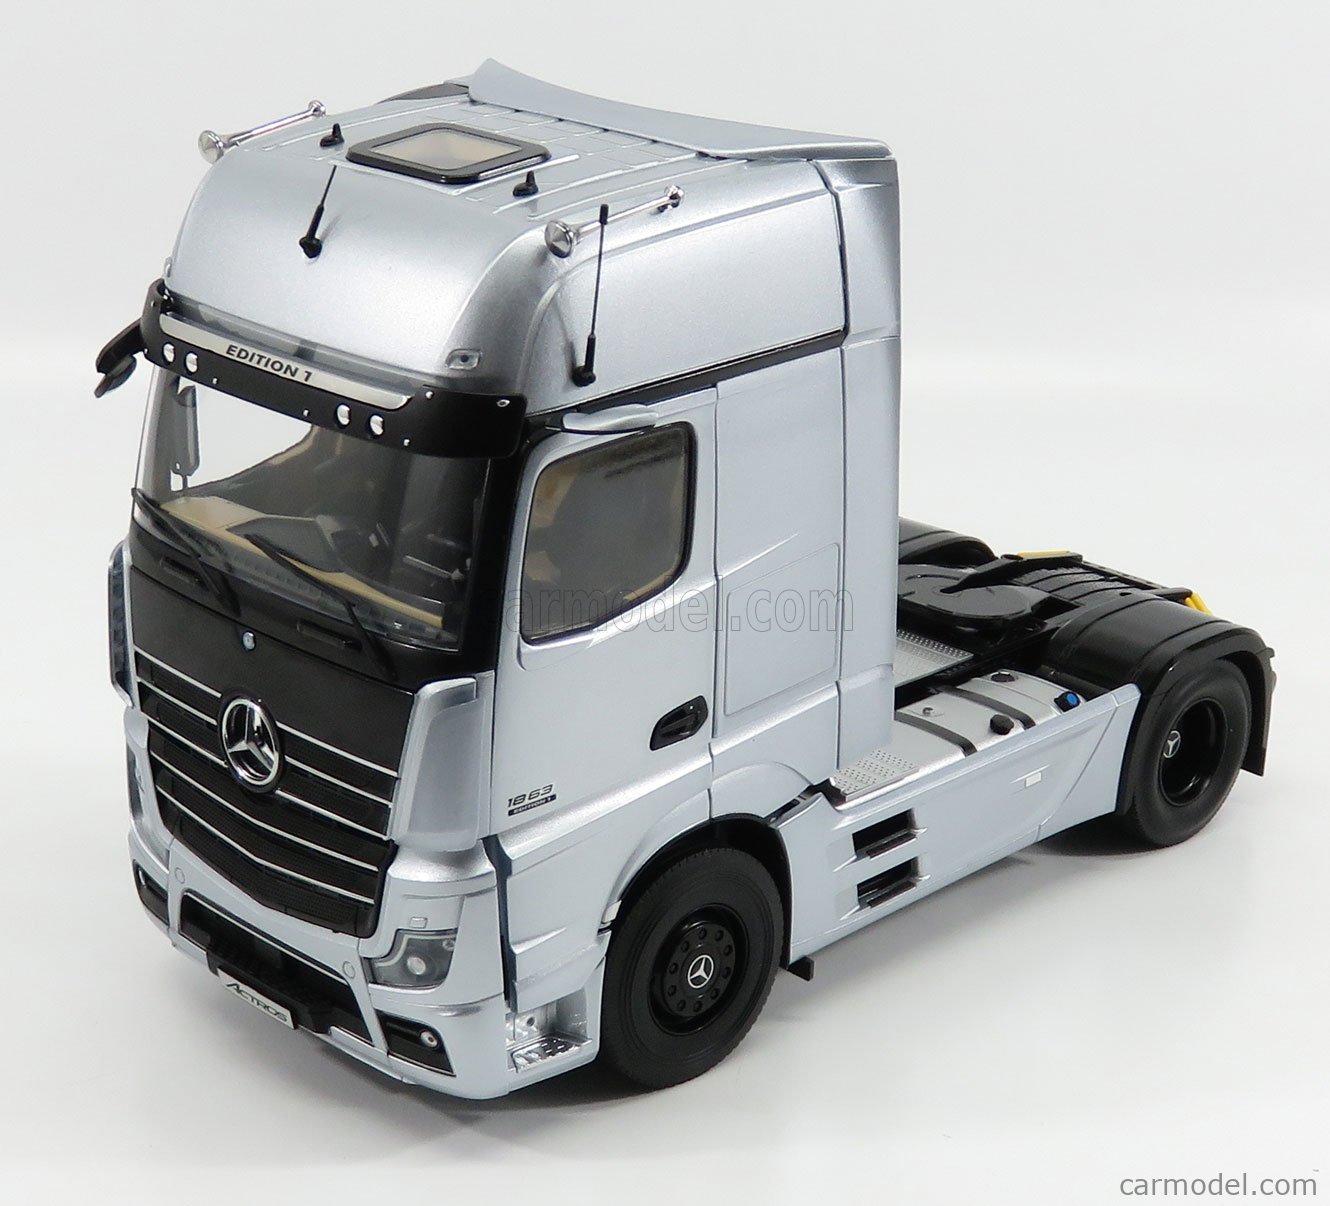 MERCEDES BENZ - ACTROS 2 1863 GIGASPACE EDITION 1 TRACTOR TRUCK 2018